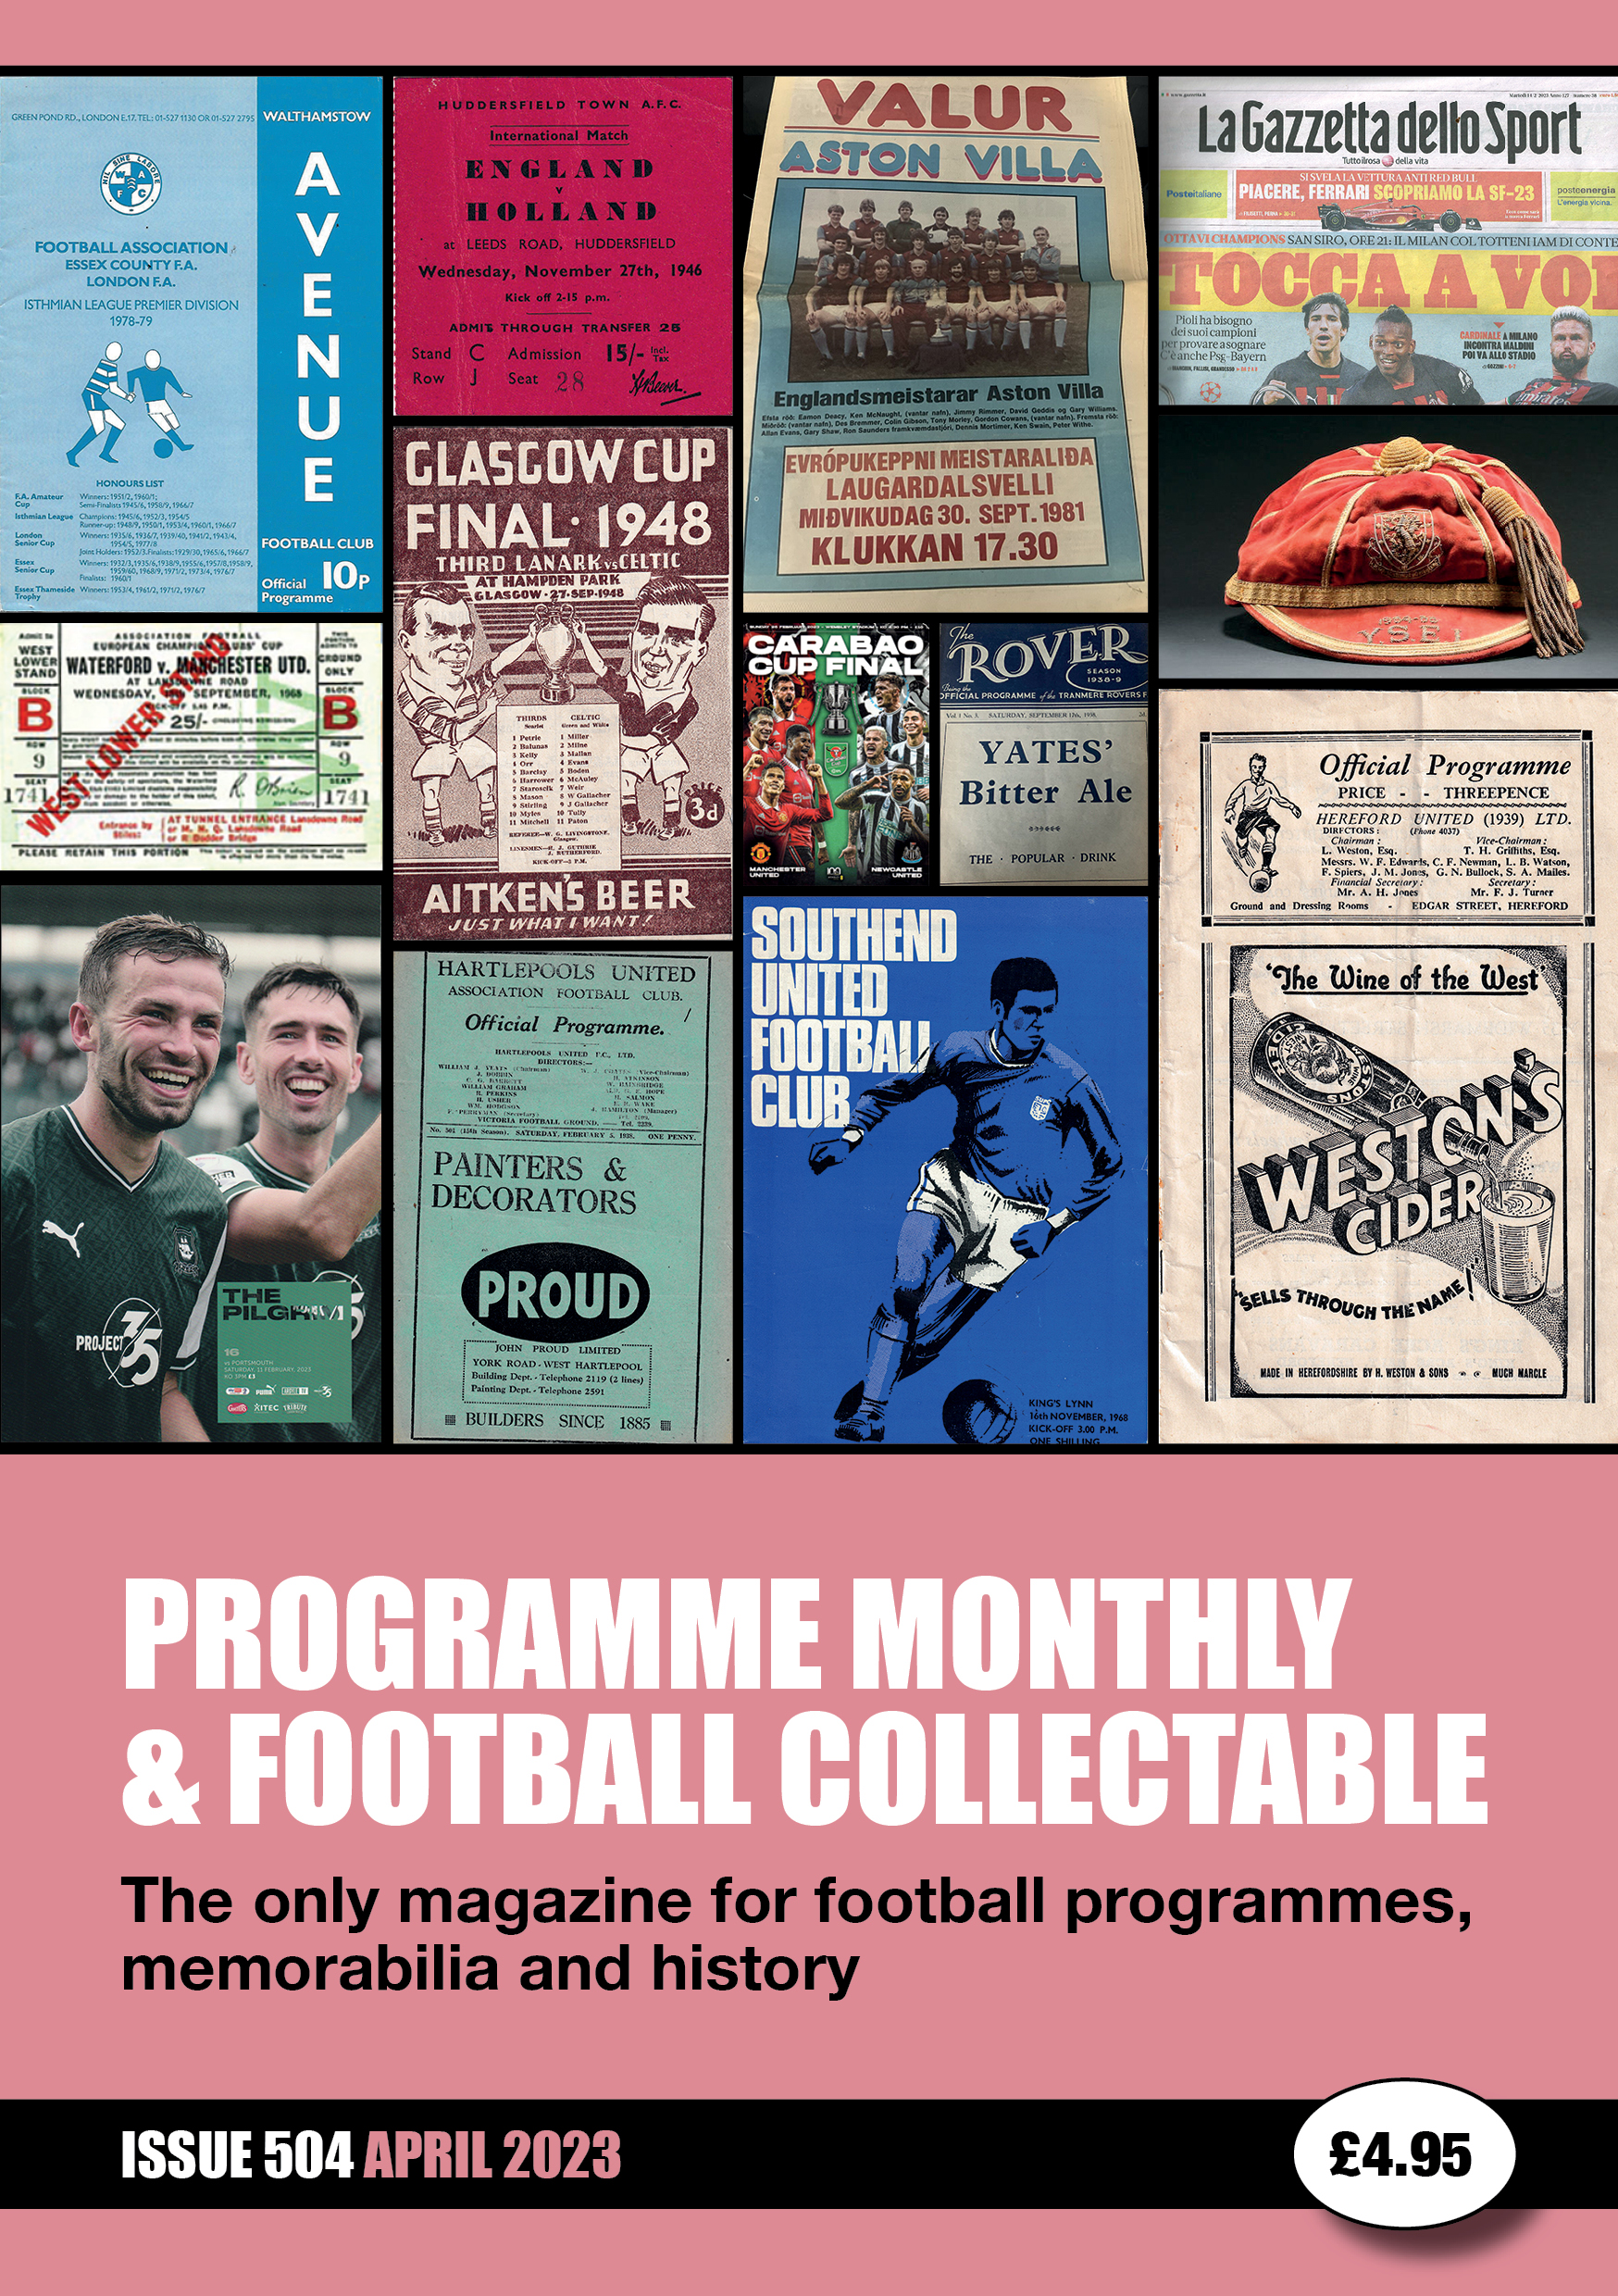 Programme Monthly - Issue 504 April 2023